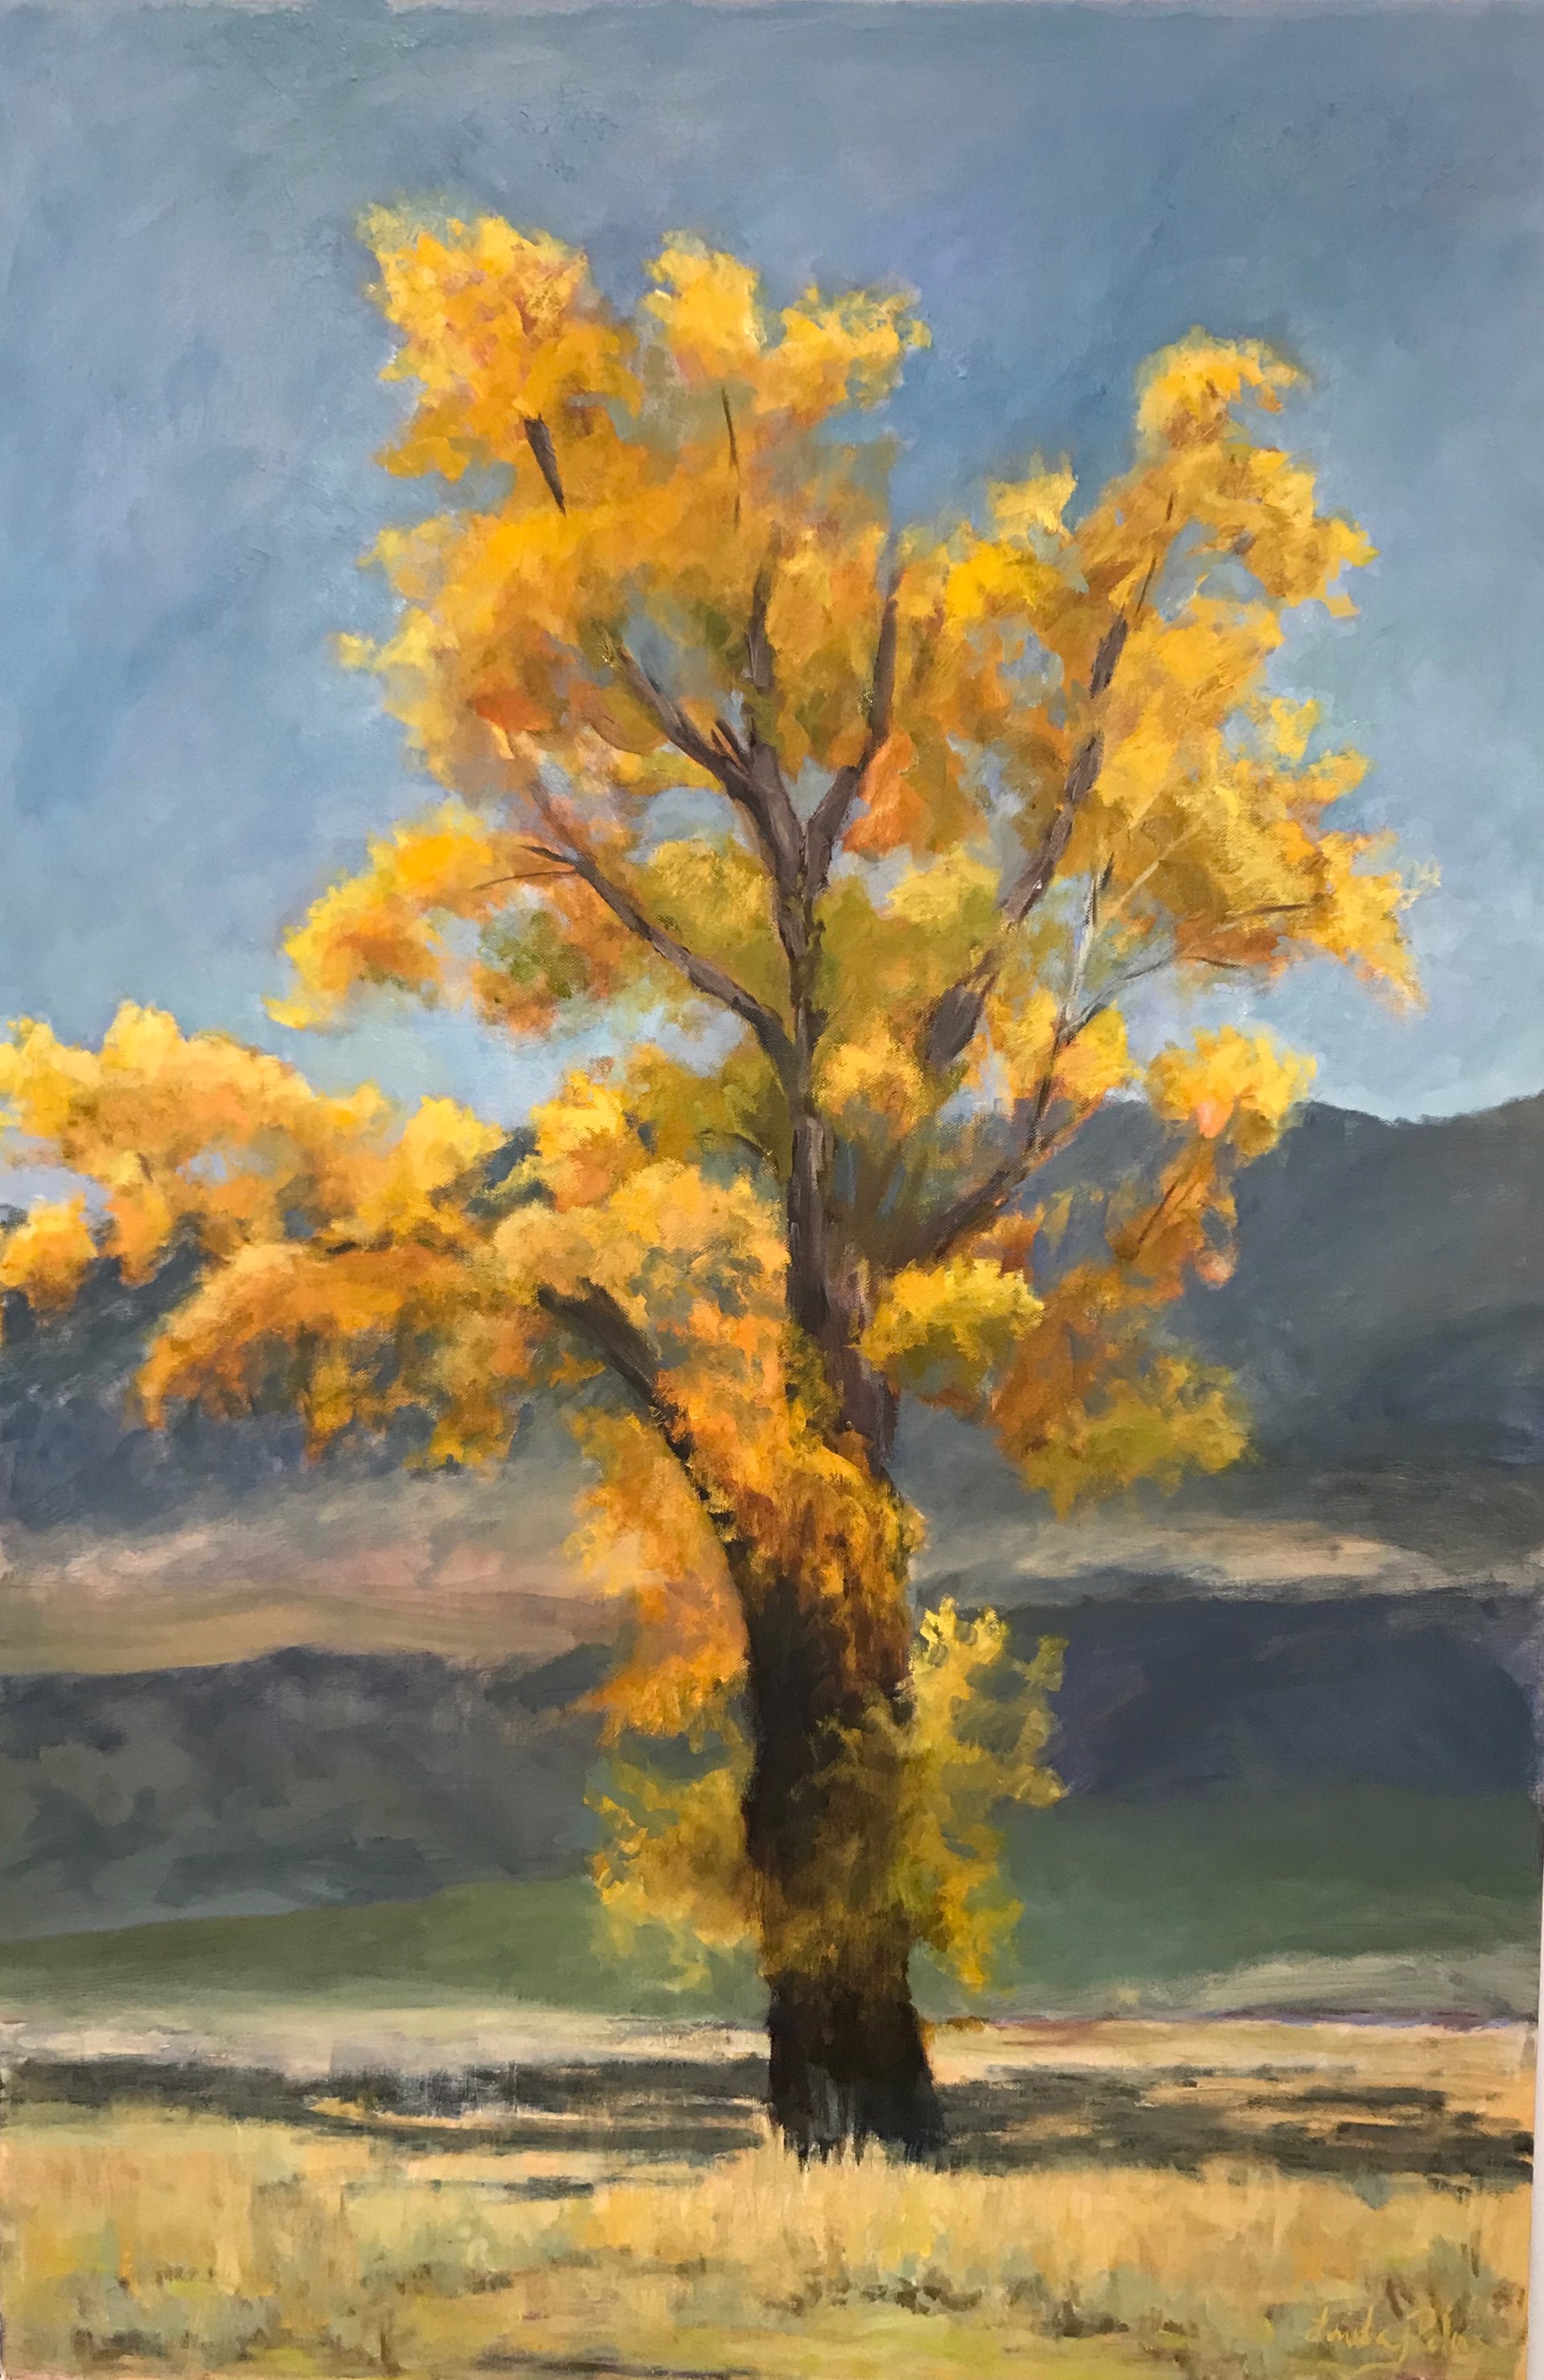 The Yellow Tree by Linda Peters